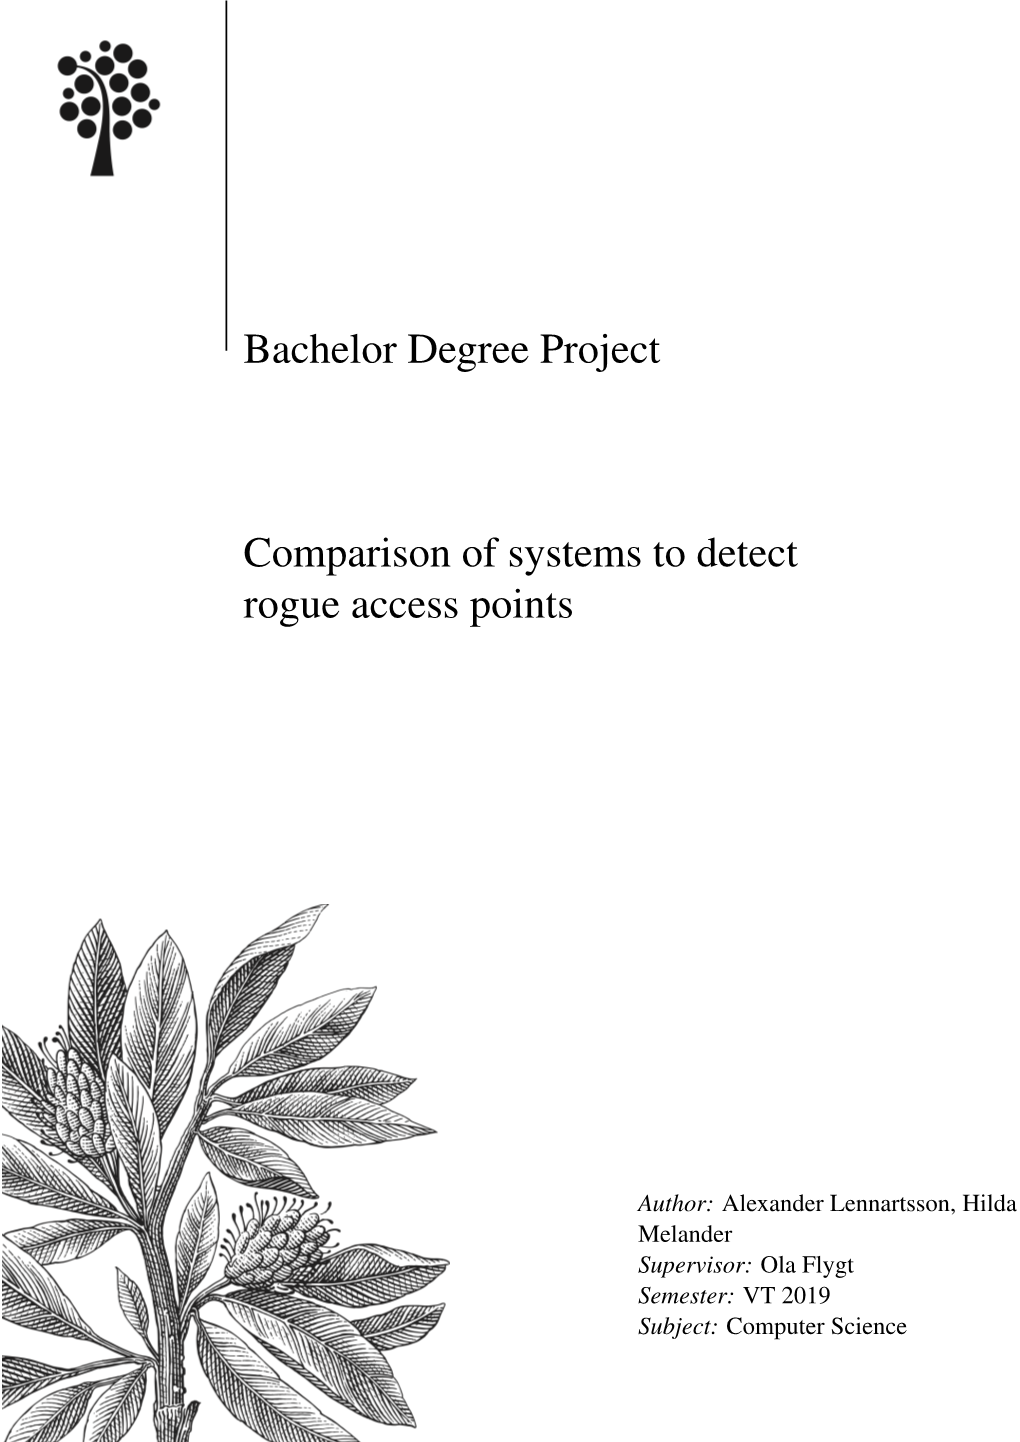 Bachelor Degree Project Comparison of Systems to Detect Rogue Access